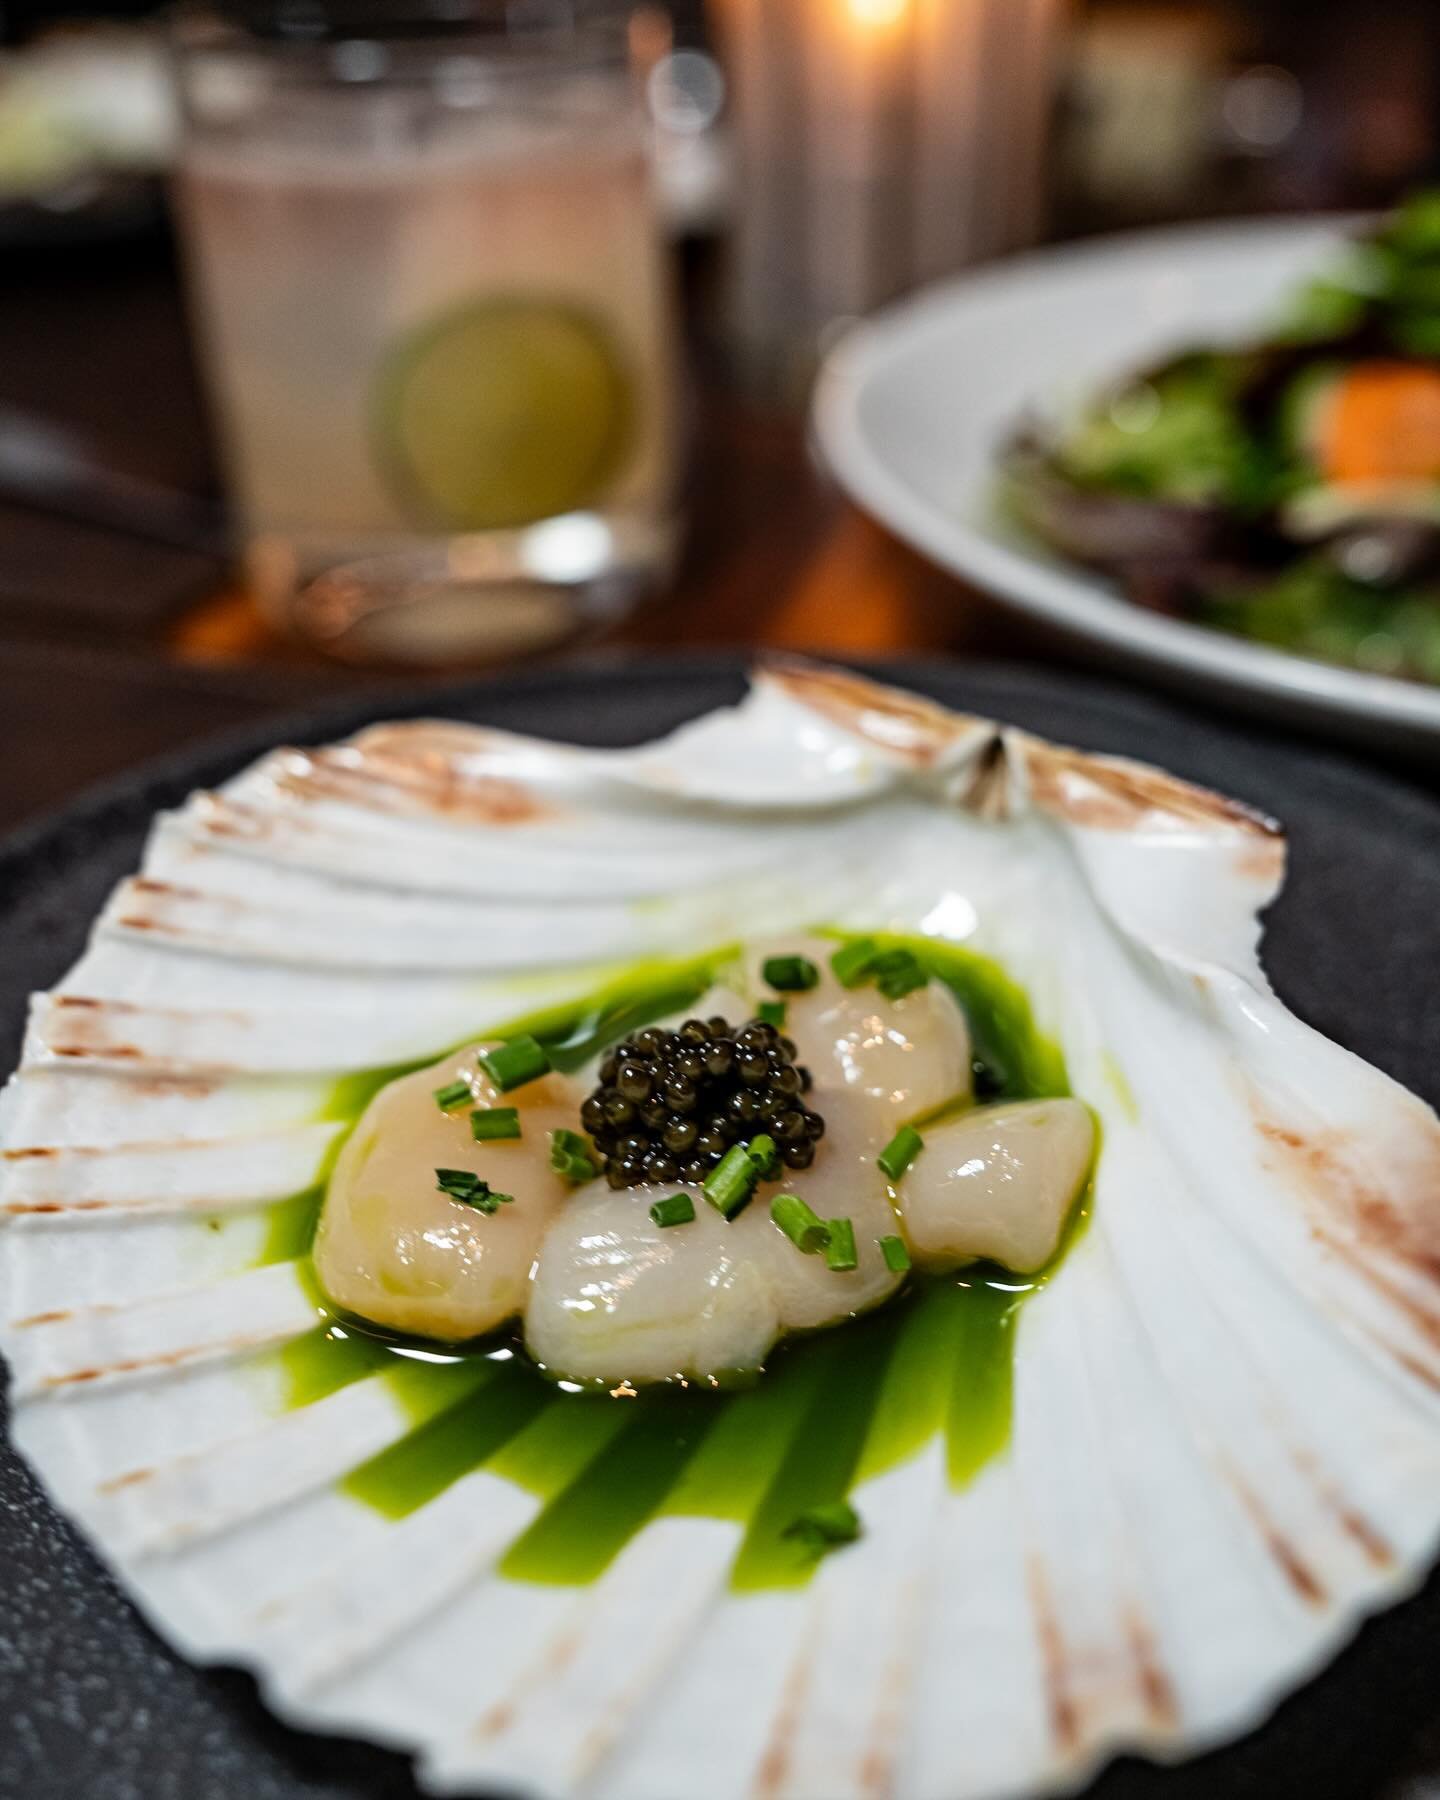 Love a starter @oceananyc ✨

Sea Scallop Crudo 
yuzu, chives, osetra caviar

Oysters Rockefeller 
pernod, parmesan, panko

#oysters #scallops #appertizer #nycfoodie #nyceats #nyceeeeeats #nycrestaurants #nycfinedining #finedining #finedininglovers #s